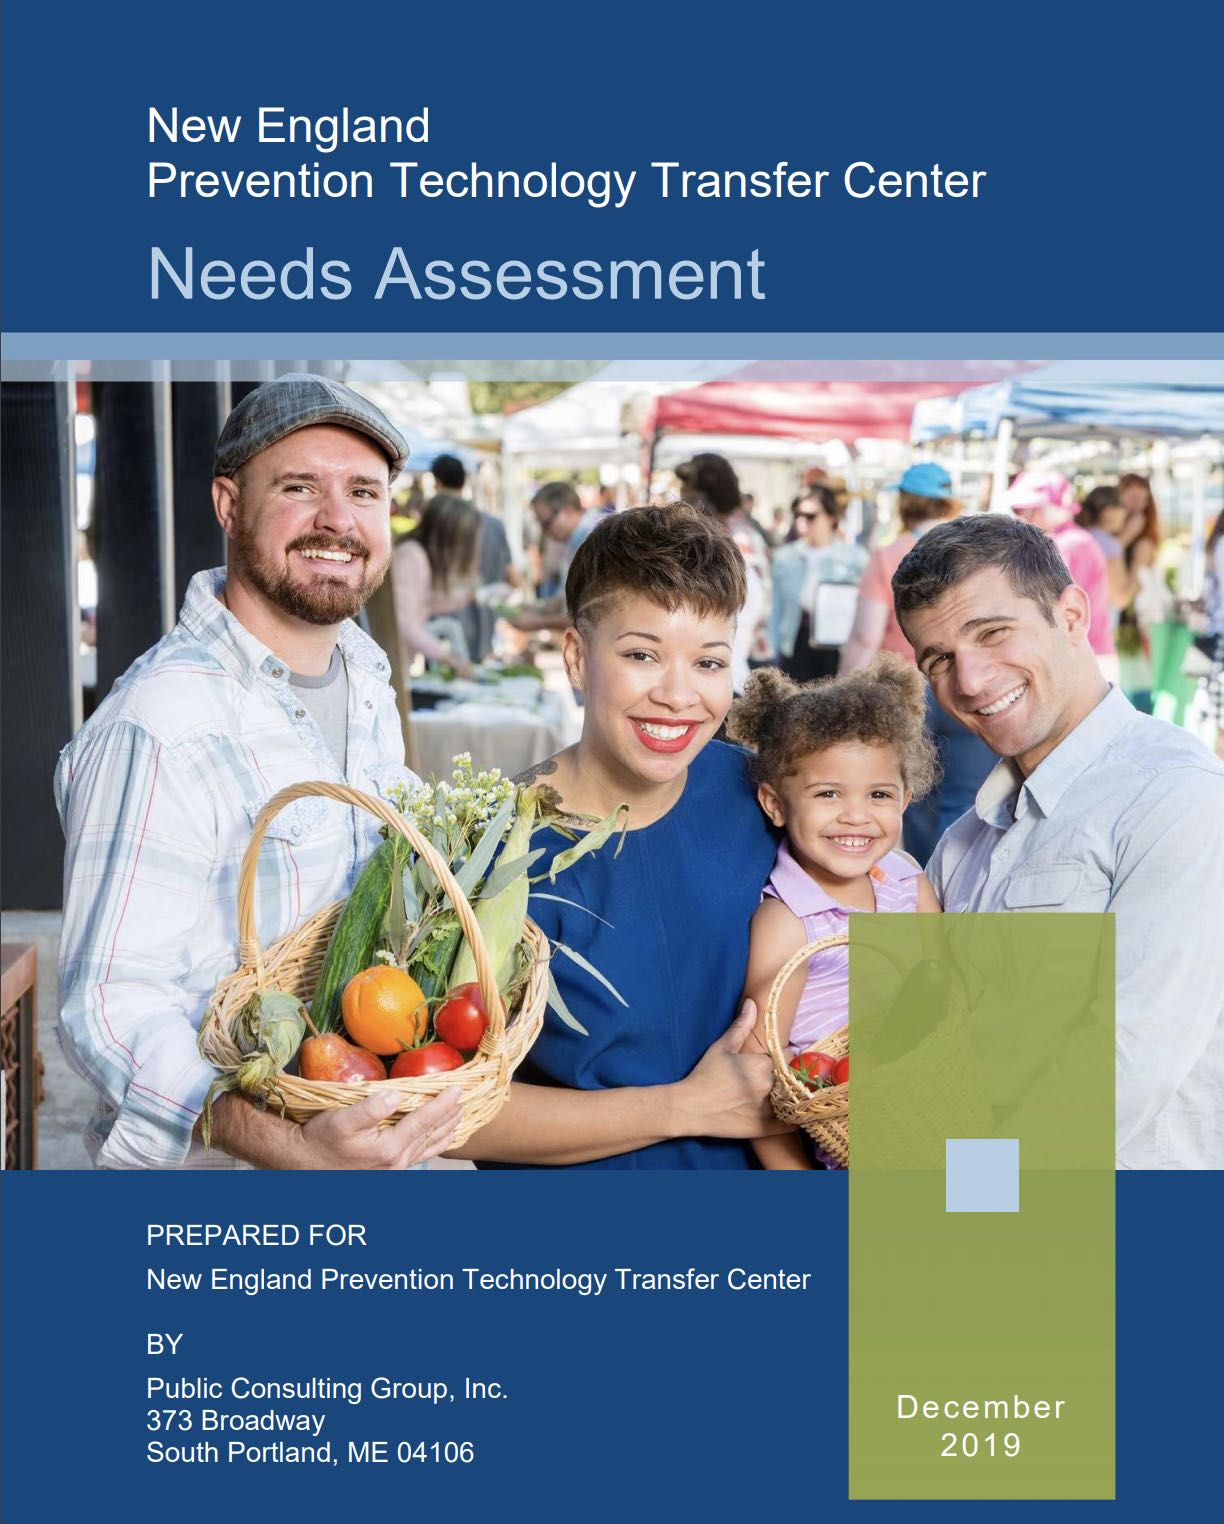 Document cover with image of family smiling at farmers market